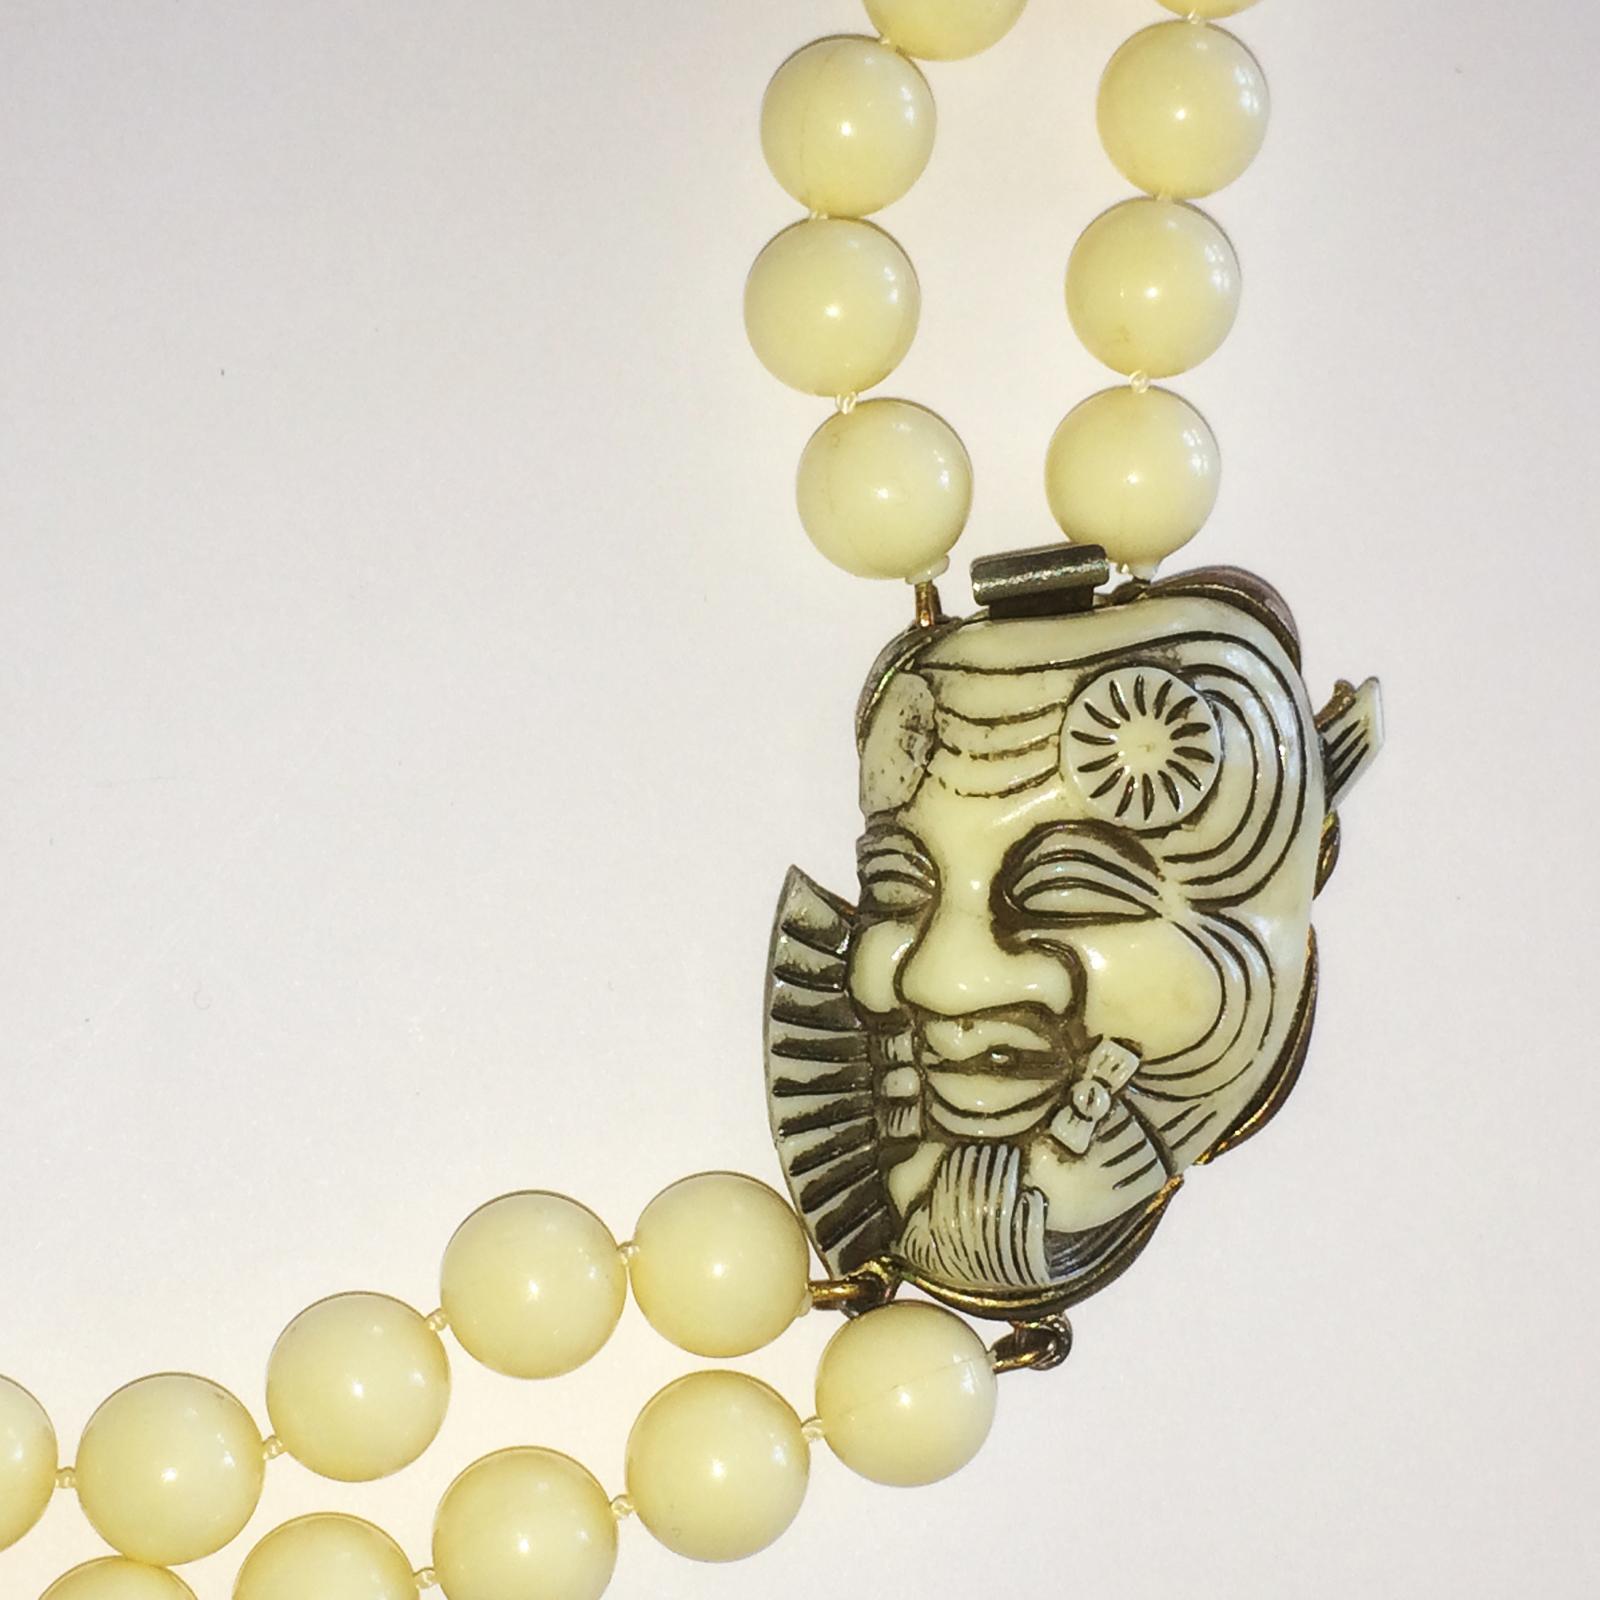 Art Deco Necklace Selro Selini Okina Devil Mask in cream Lucite with Pendant including Clasp in perfect working order on a double row of matching beads. SELINI Mark to raised bar on rear of Mask. All in excellent condition with no damage, no repairs